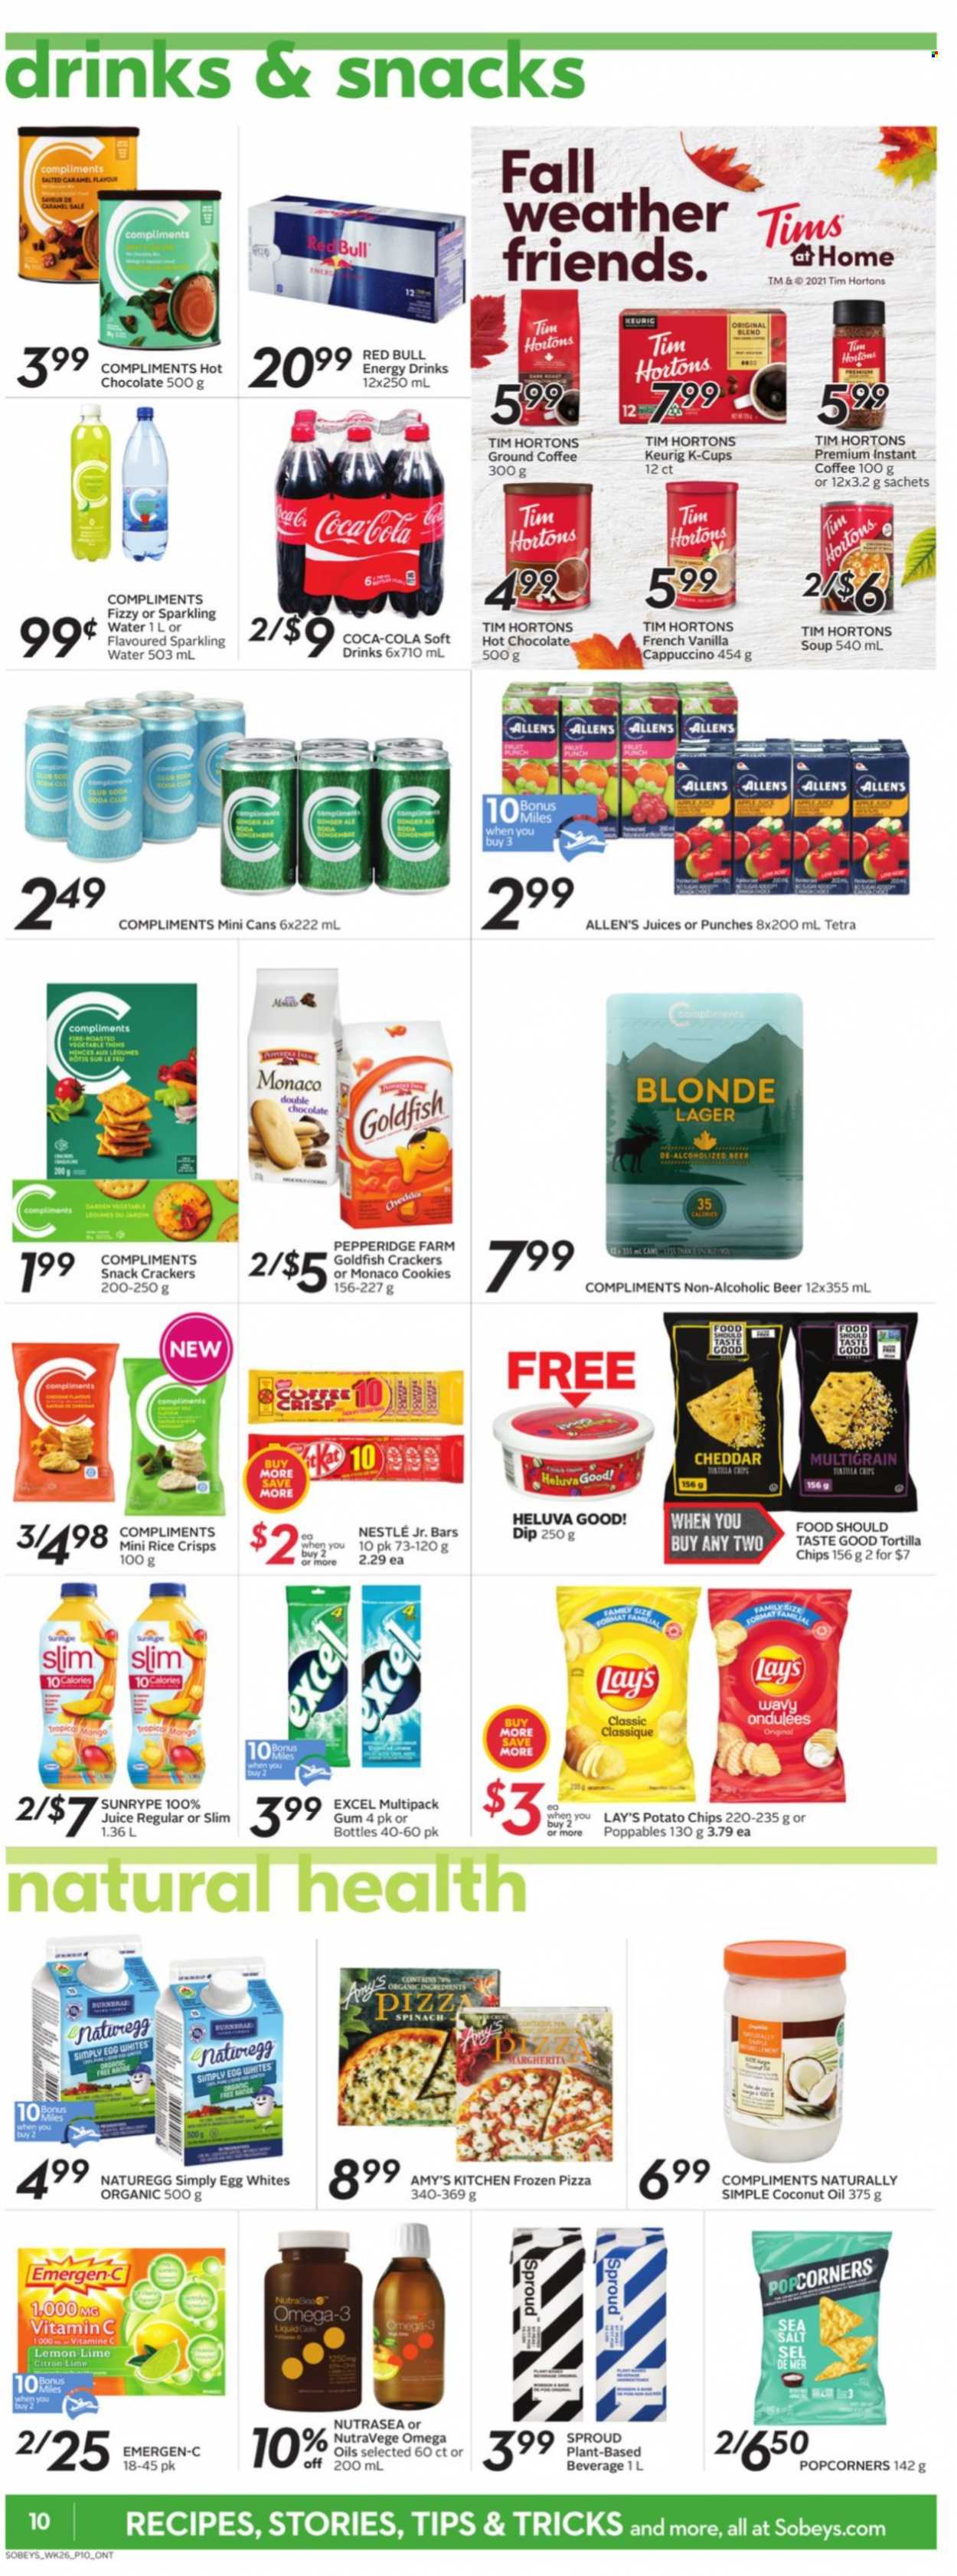 thumbnail - Sobeys Flyer - October 21, 2021 - October 27, 2021 - Sales products - pizza, soup, eggs, cookies, crackers, tortilla chips, potato chips, Lay’s, Thins, popcorn, Goldfish, rice crisps, rice, coconut oil, oil, Coca-Cola, juice, energy drink, soft drink, Red Bull, sparkling water, hot chocolate, cappuccino, instant coffee, ground coffee, coffee capsules, K-Cups, Keurig, punch, beer, Lager, vitamin c, Omega-3, Emergen-C, Nestlé. Page 10.